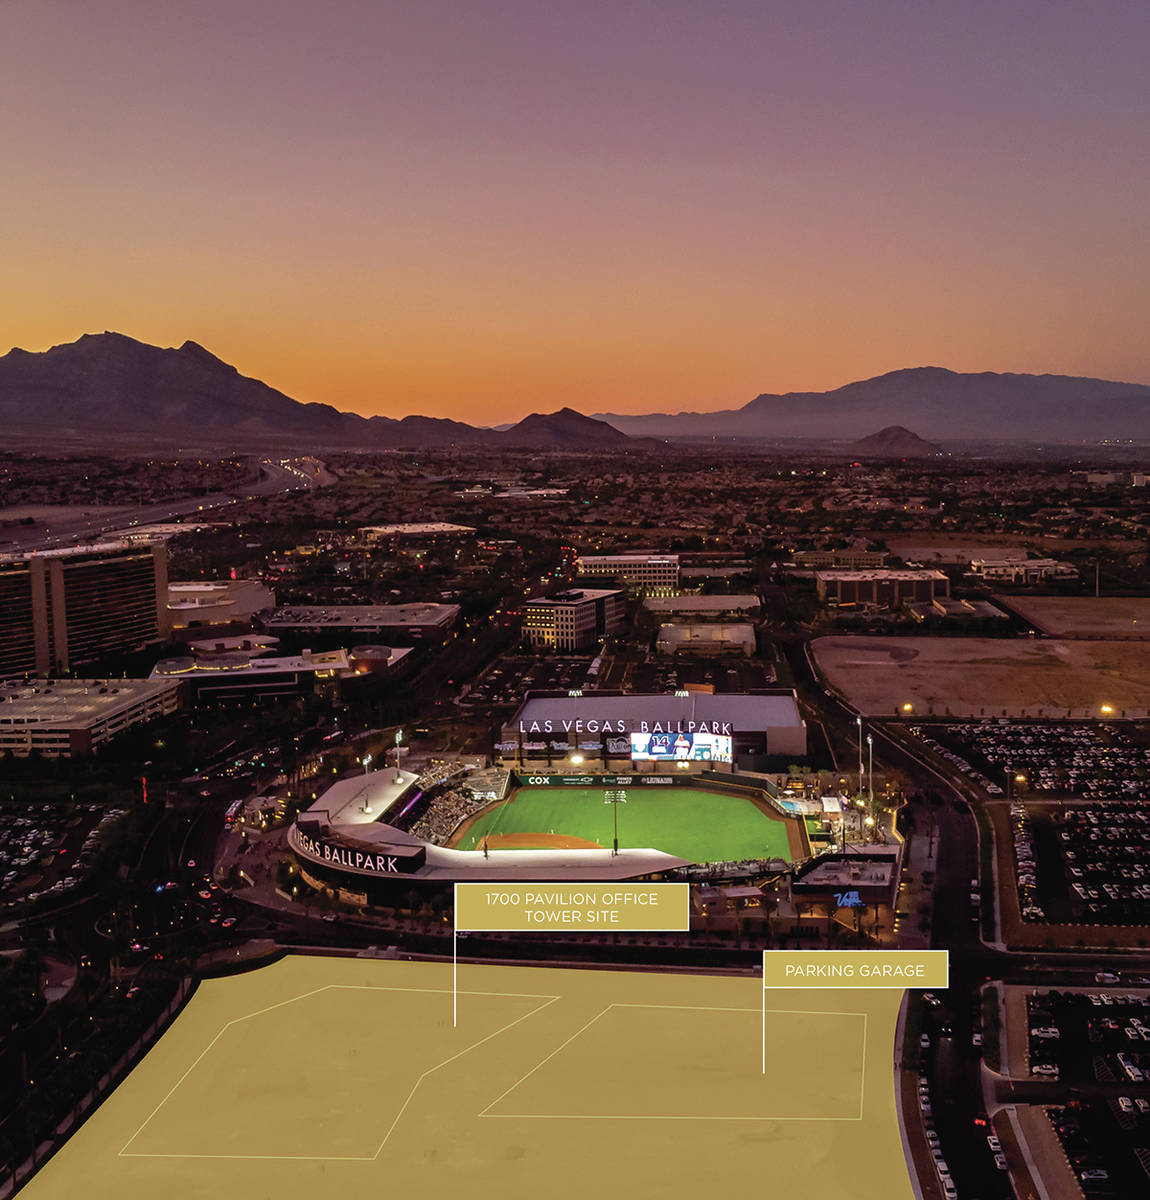 An aerial view of Las Vegas Ballpark shows where new projects will be built, including 1700 Pav ...